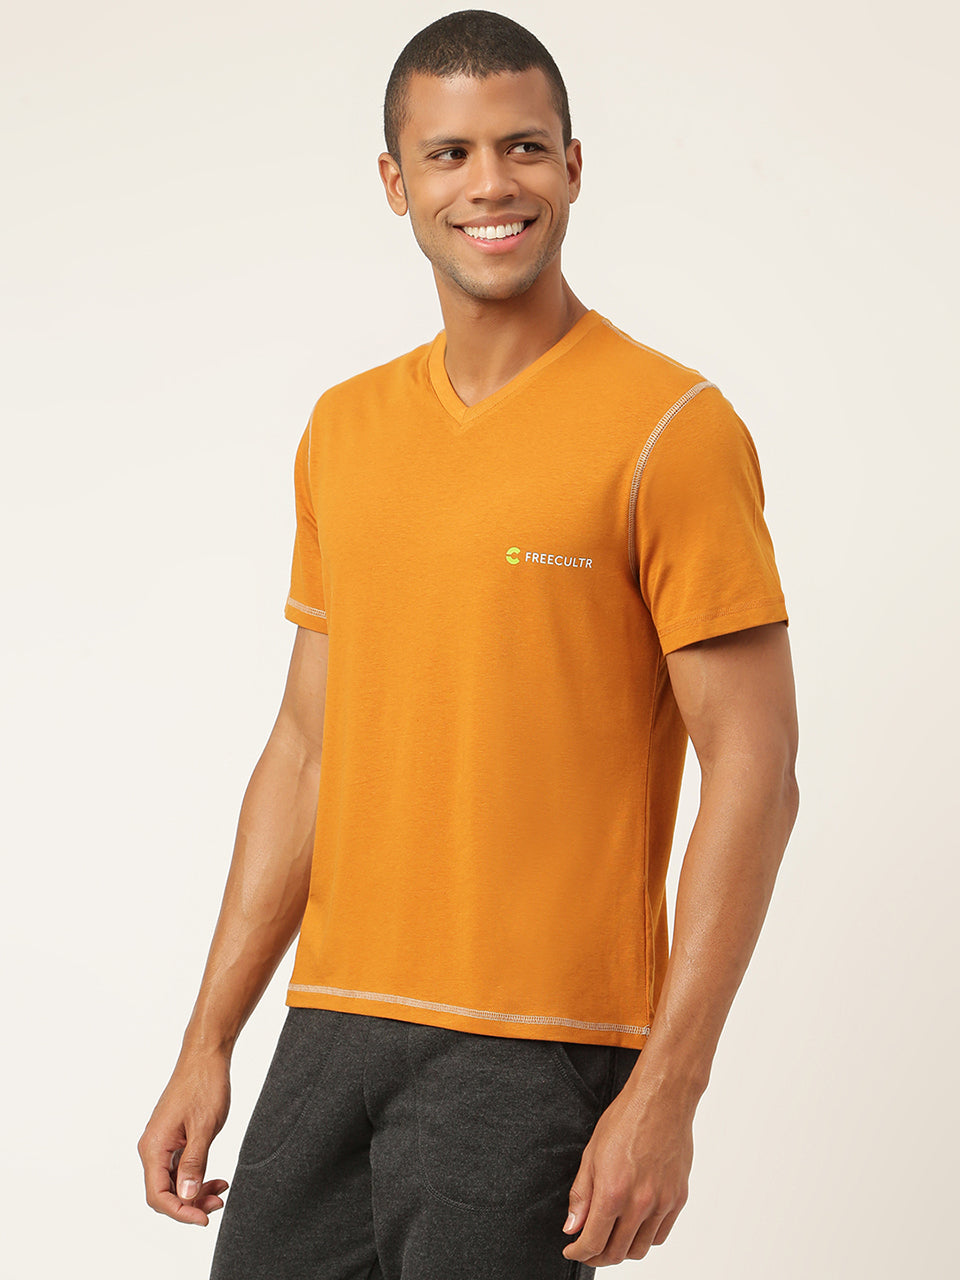 Men's Organic Bamboo Casual Tees - V-Neck (Pack Of 1)